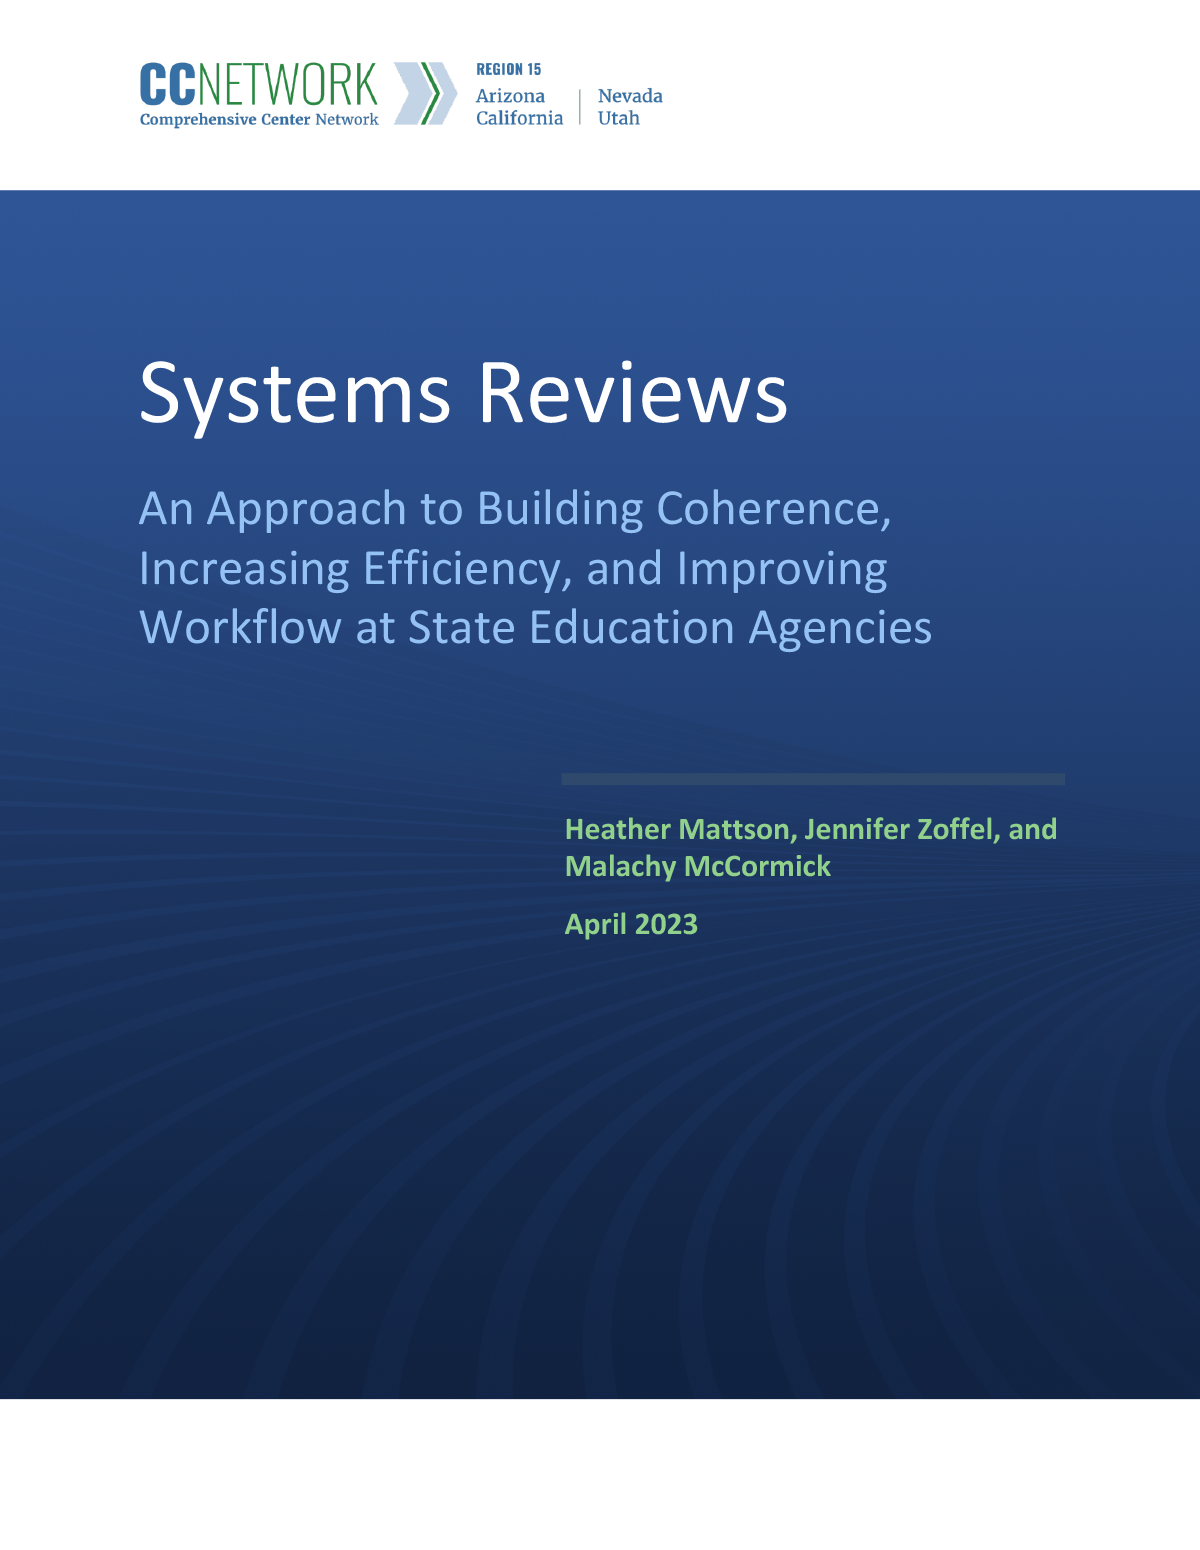 Systems Reviews: An Approach to Building Coherence, Increasing Efficiency, and Improving Workflow at State Education Agencies